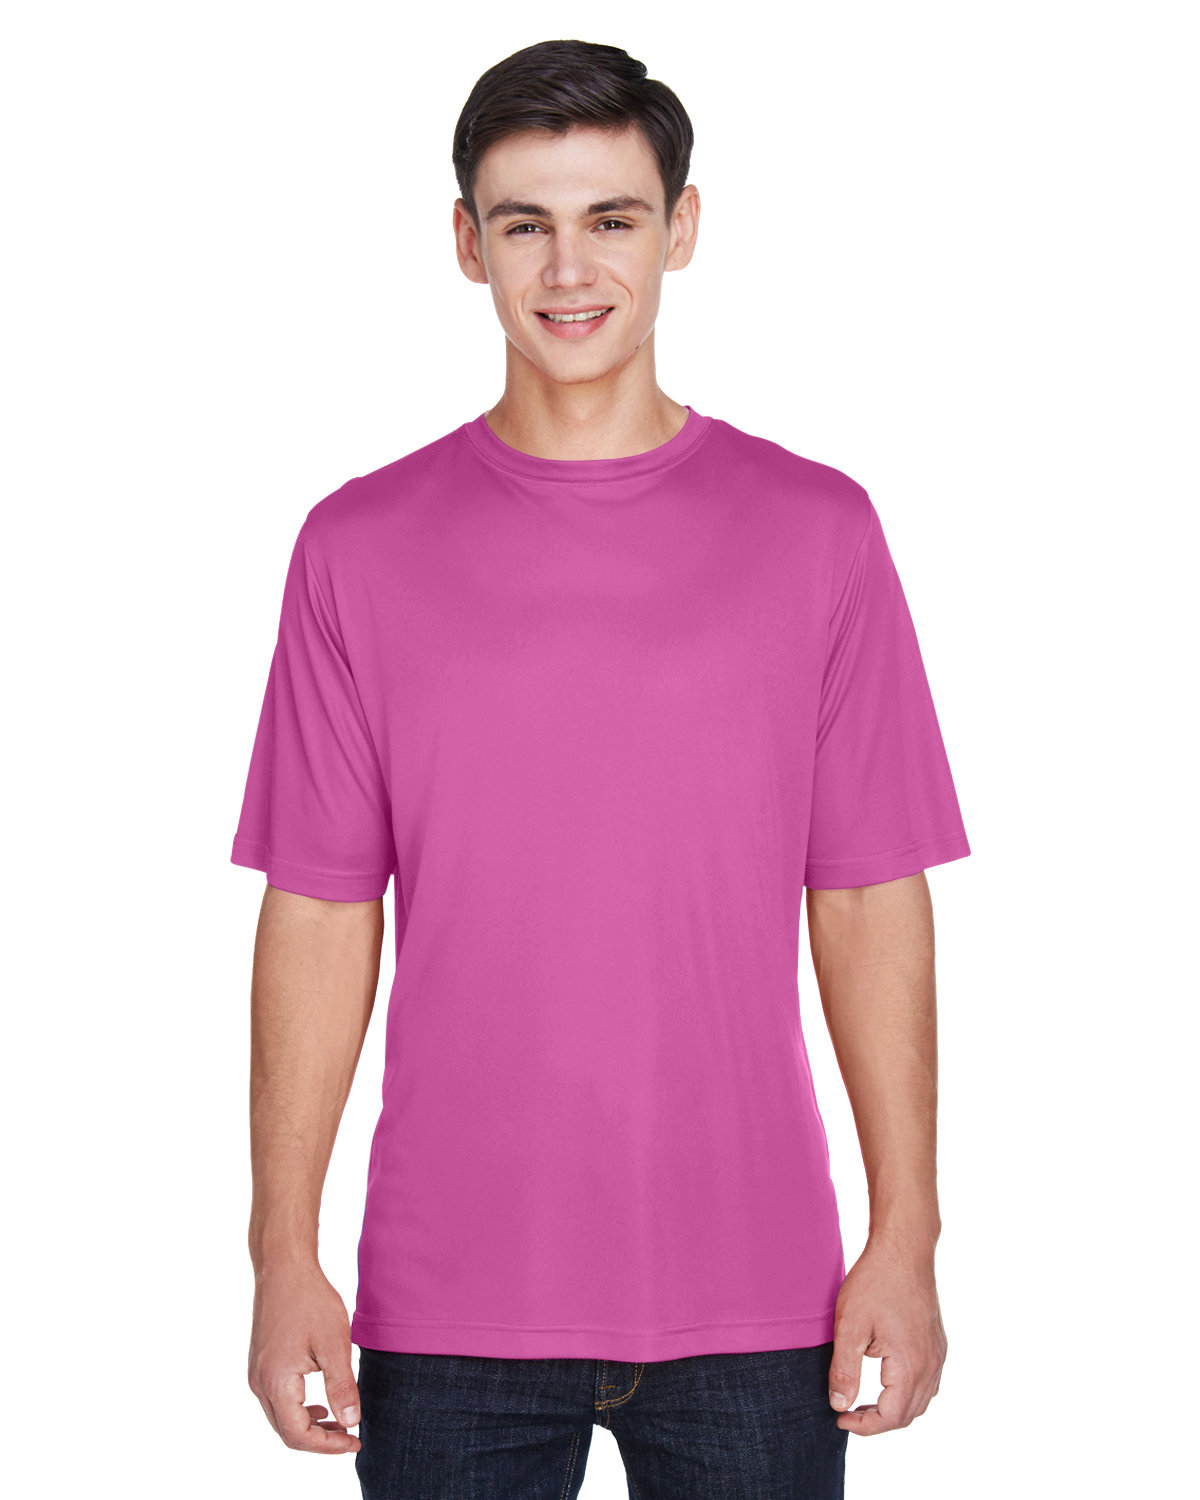 Team 365 Men's Zone Performance T-Shirt sp charity pink 